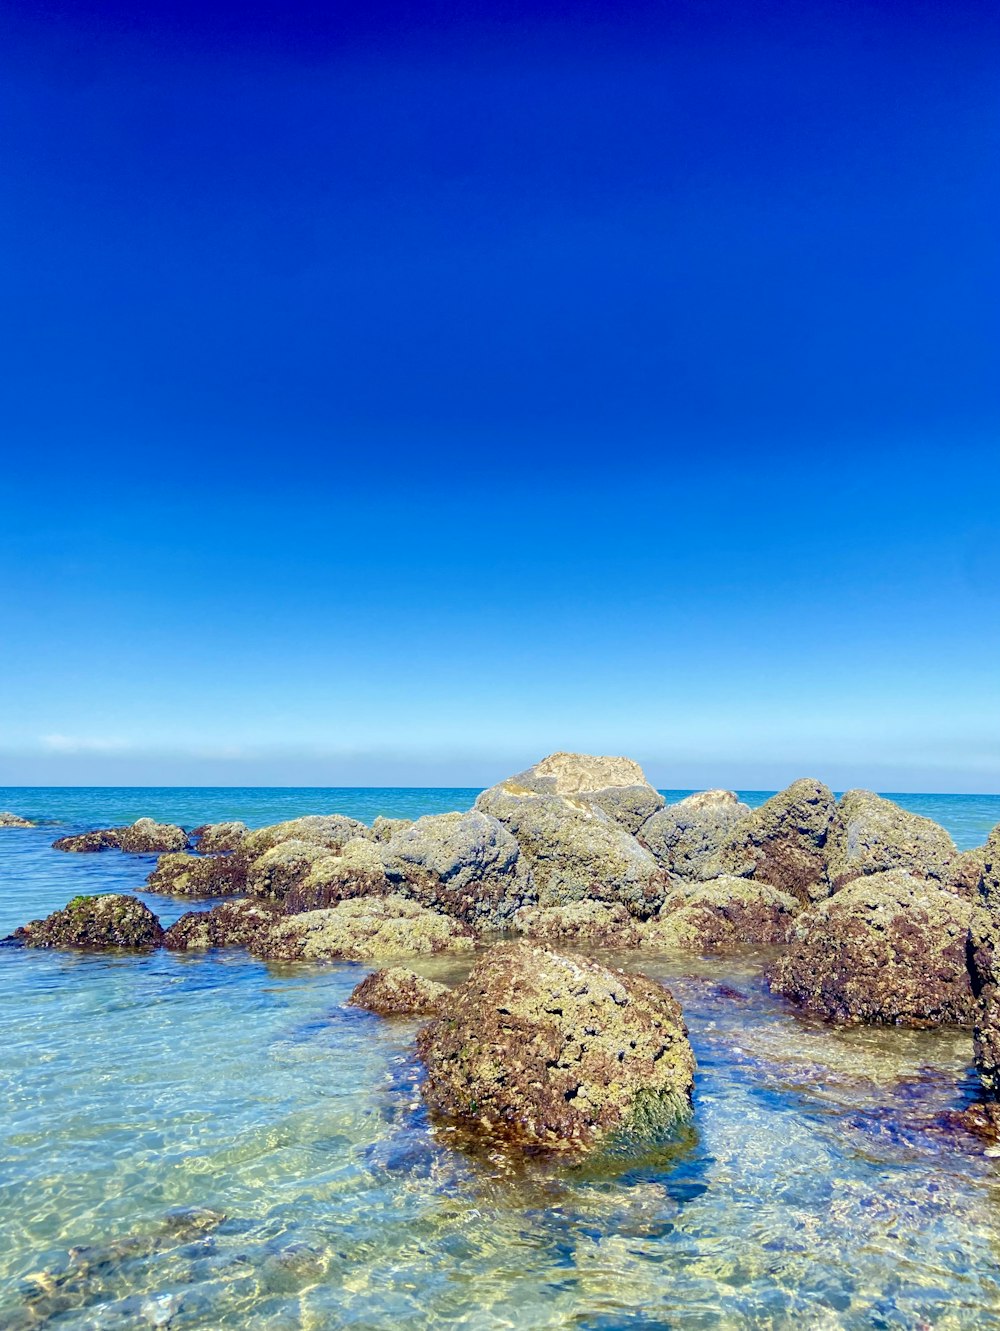 a rocky beach with clear blue water under a blue sky